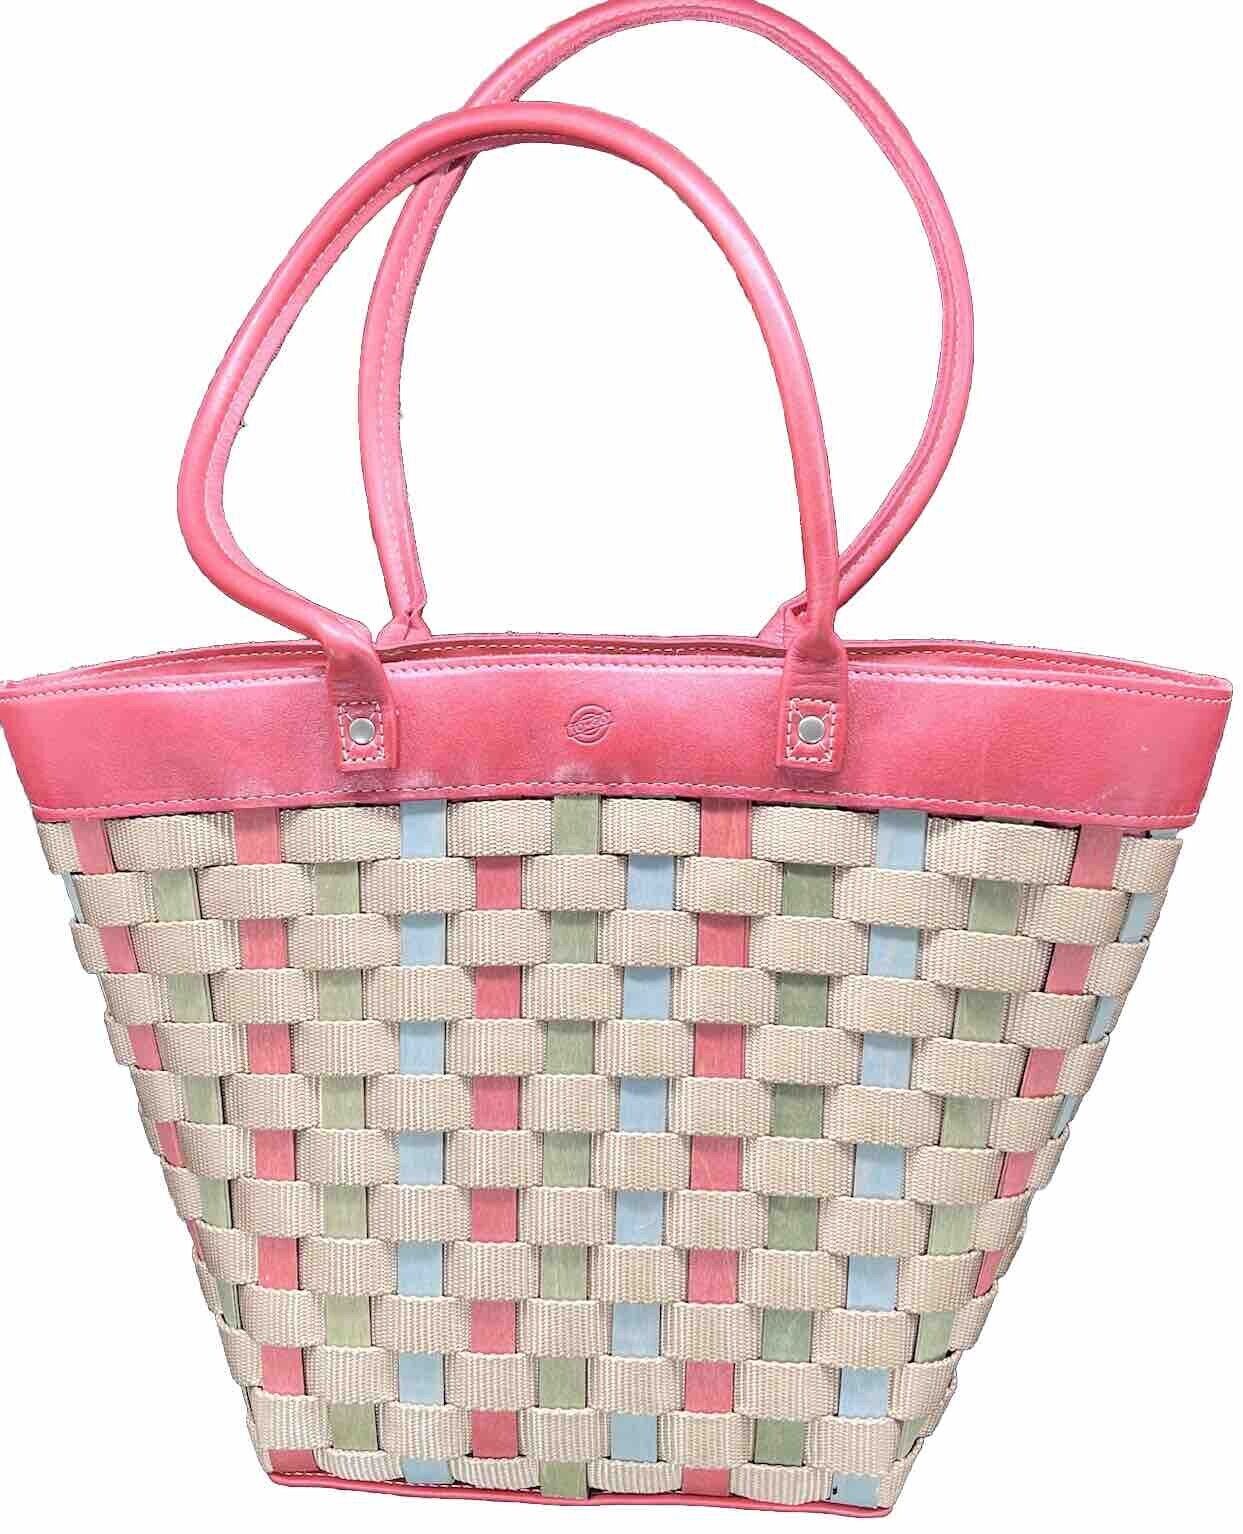 Longaberger TO GO Woven Basket Purse Tote Handbag 2008 Easter Mothers Day